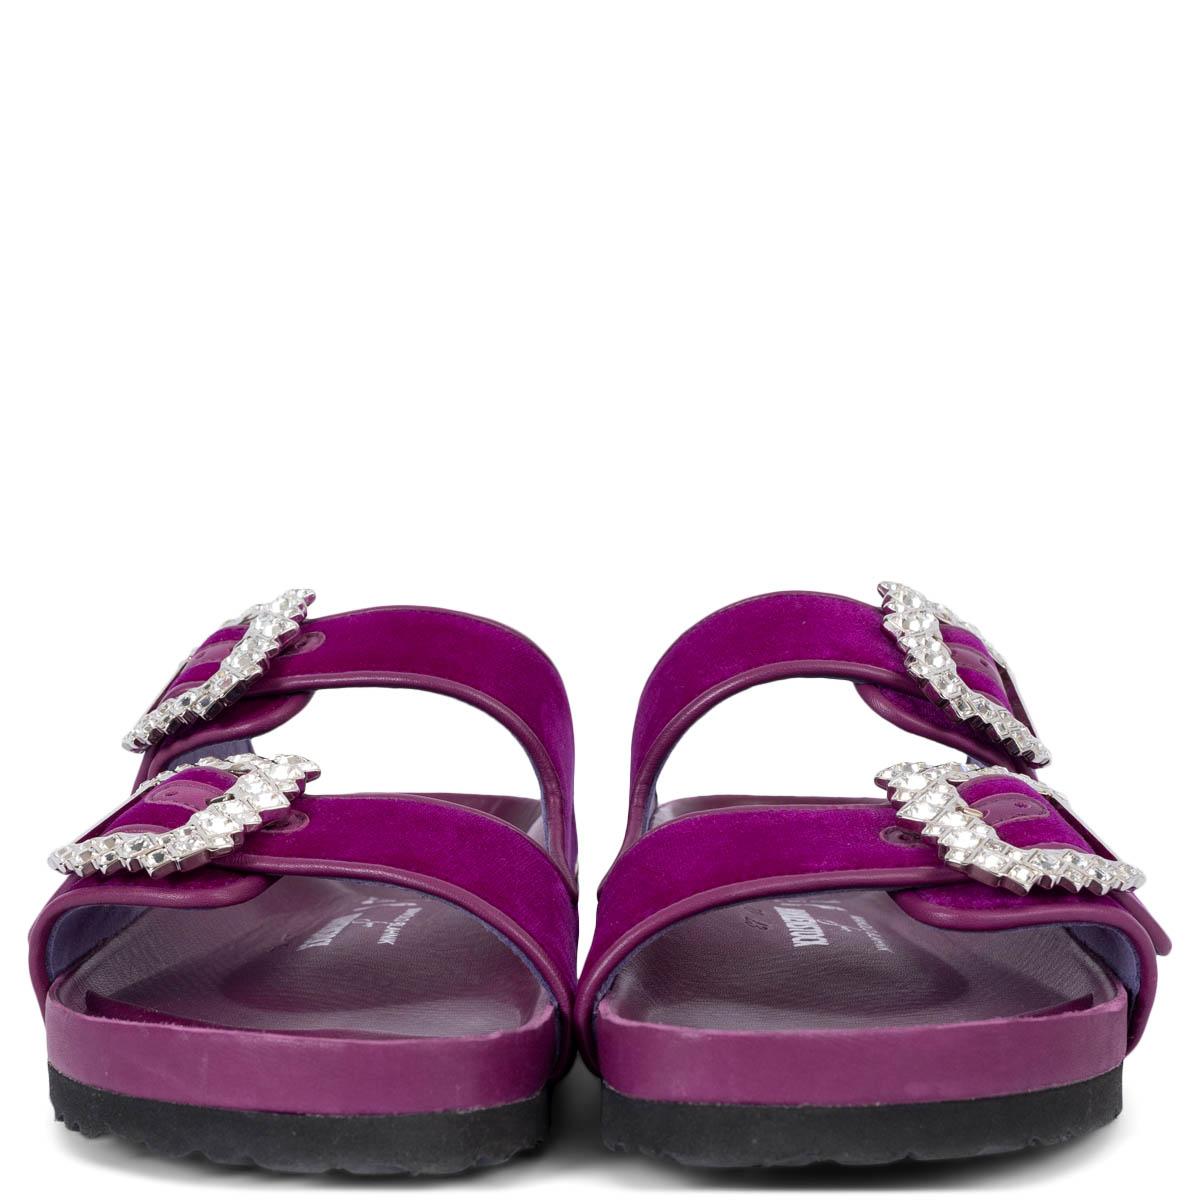 100% authentic Manolo Blahnik x Birkenstock Arizona sandals in fuchsia pink velvet and leather adorned with iterations of Manolo’s iconic sparkling square buckles. Have been worn once inside and are in virtually new condition. 

2020